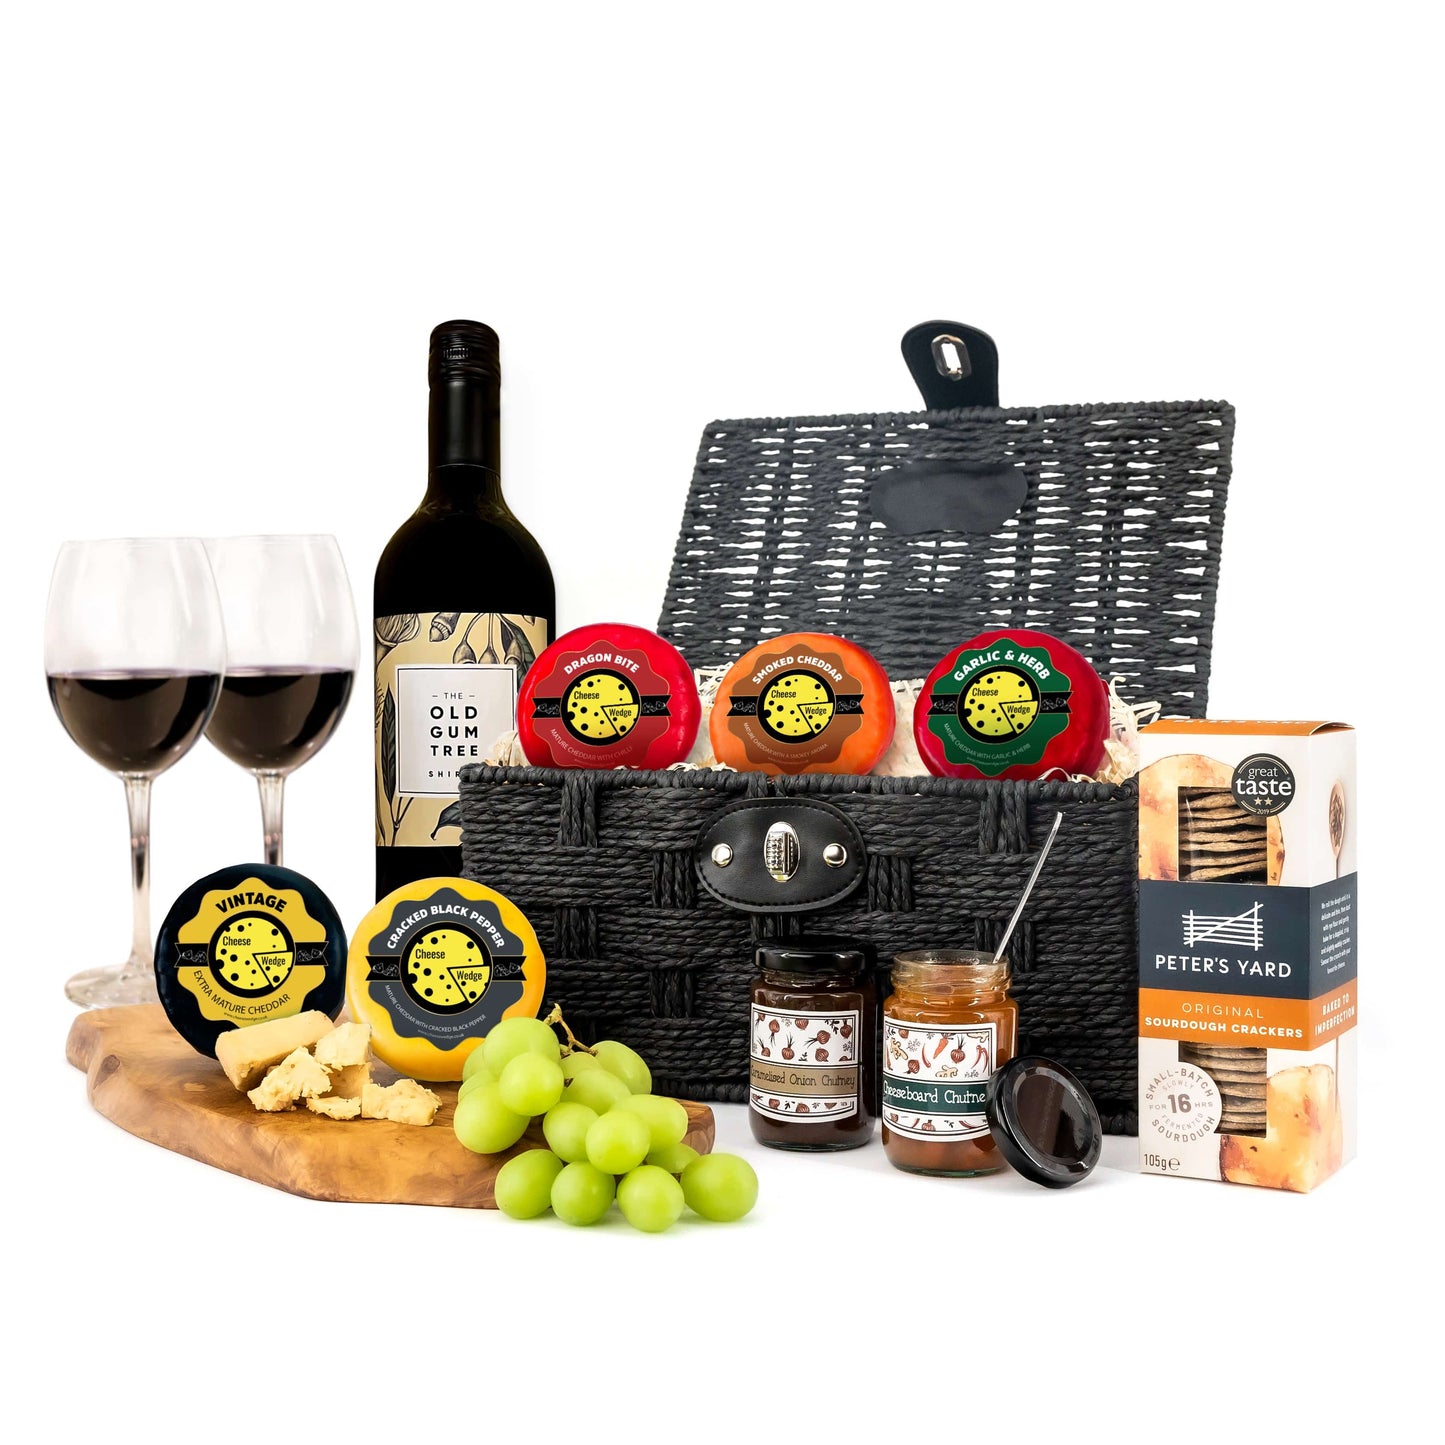 The Cheese Wedge Company Alcohol Hamper Luxury Truckle & Wine Hamper